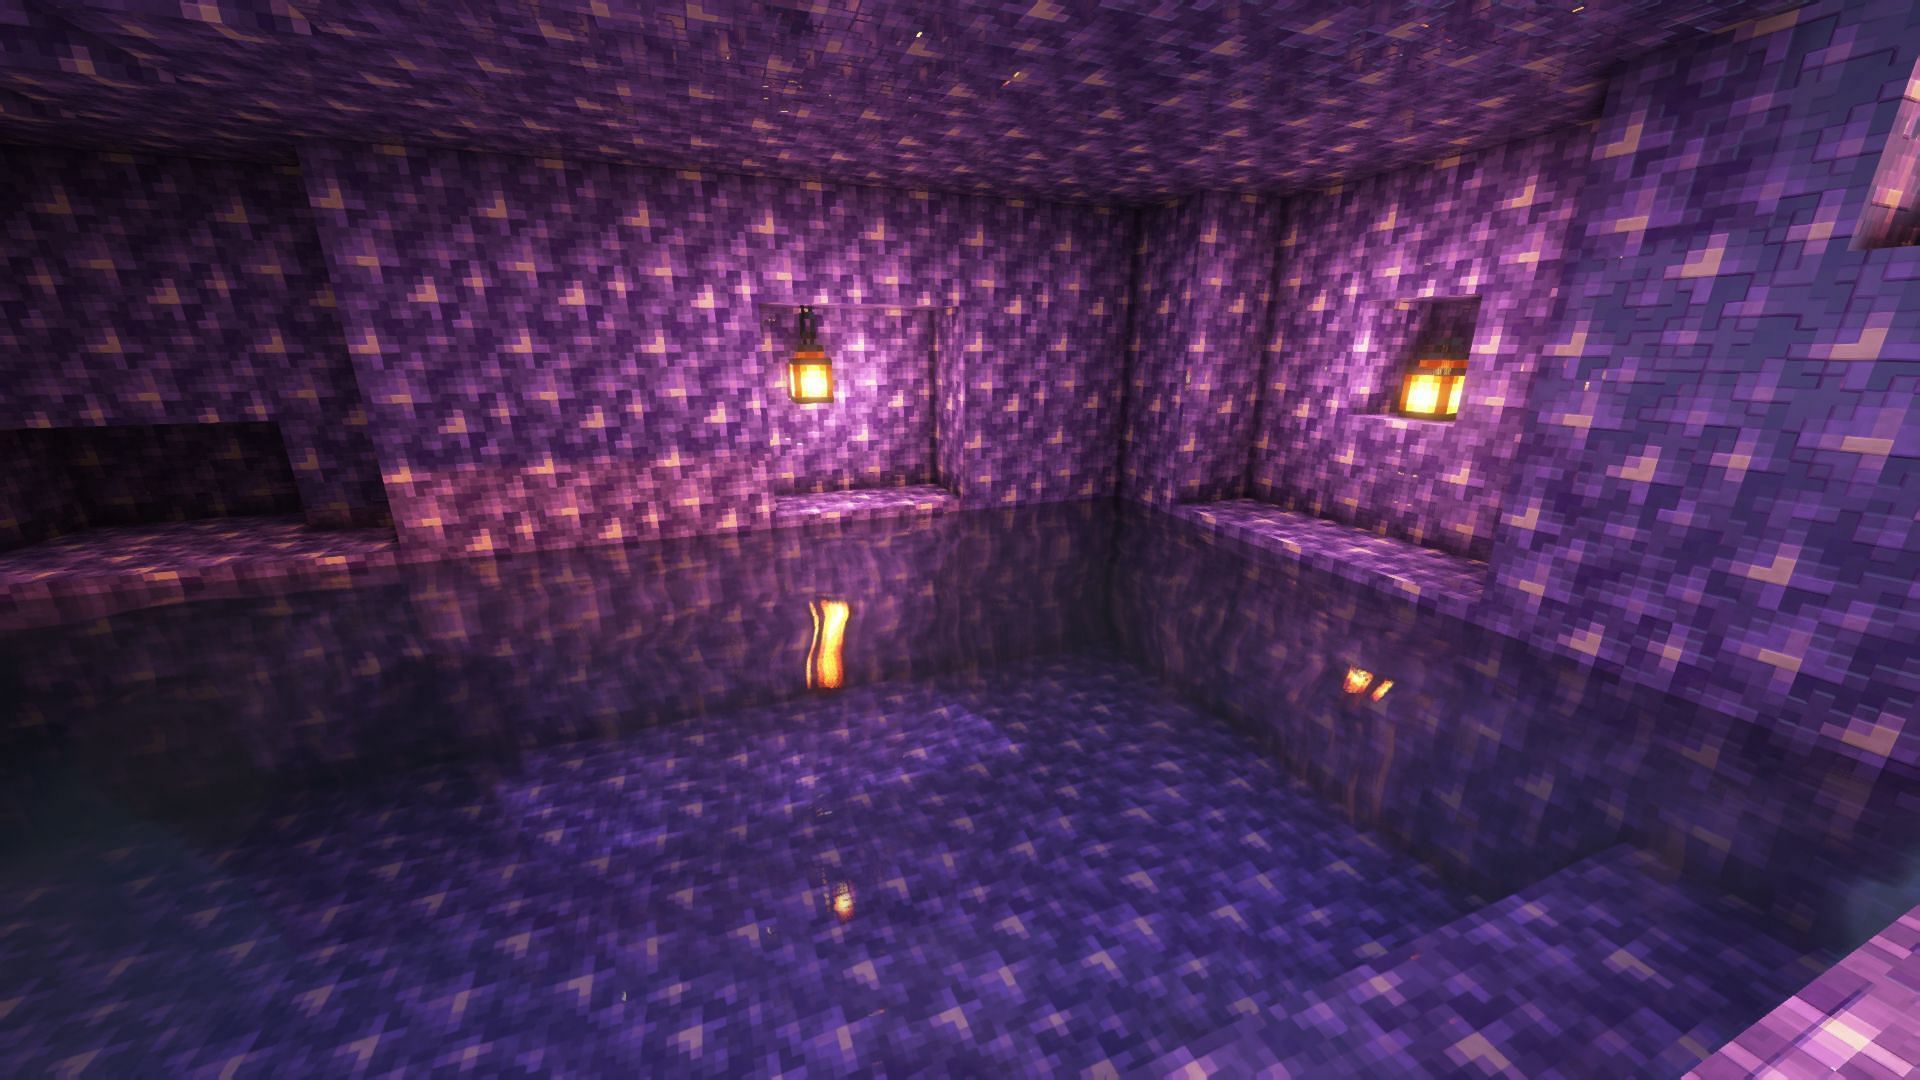 A covered pool designed completely with amethyst blocks in Minecraft (Image via Mojang)